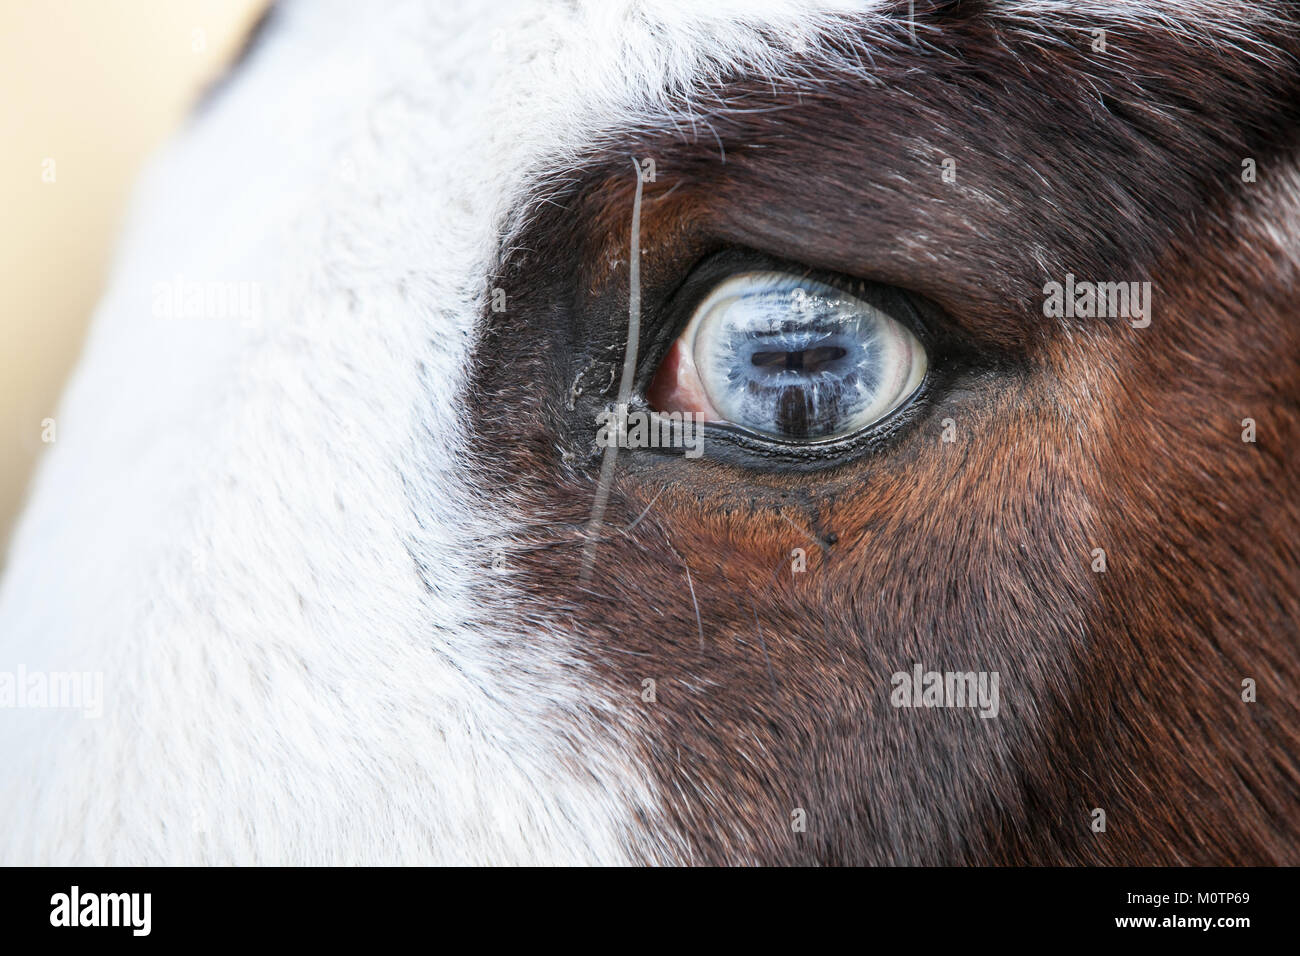 Horse with bright blue eyes Stock Photo